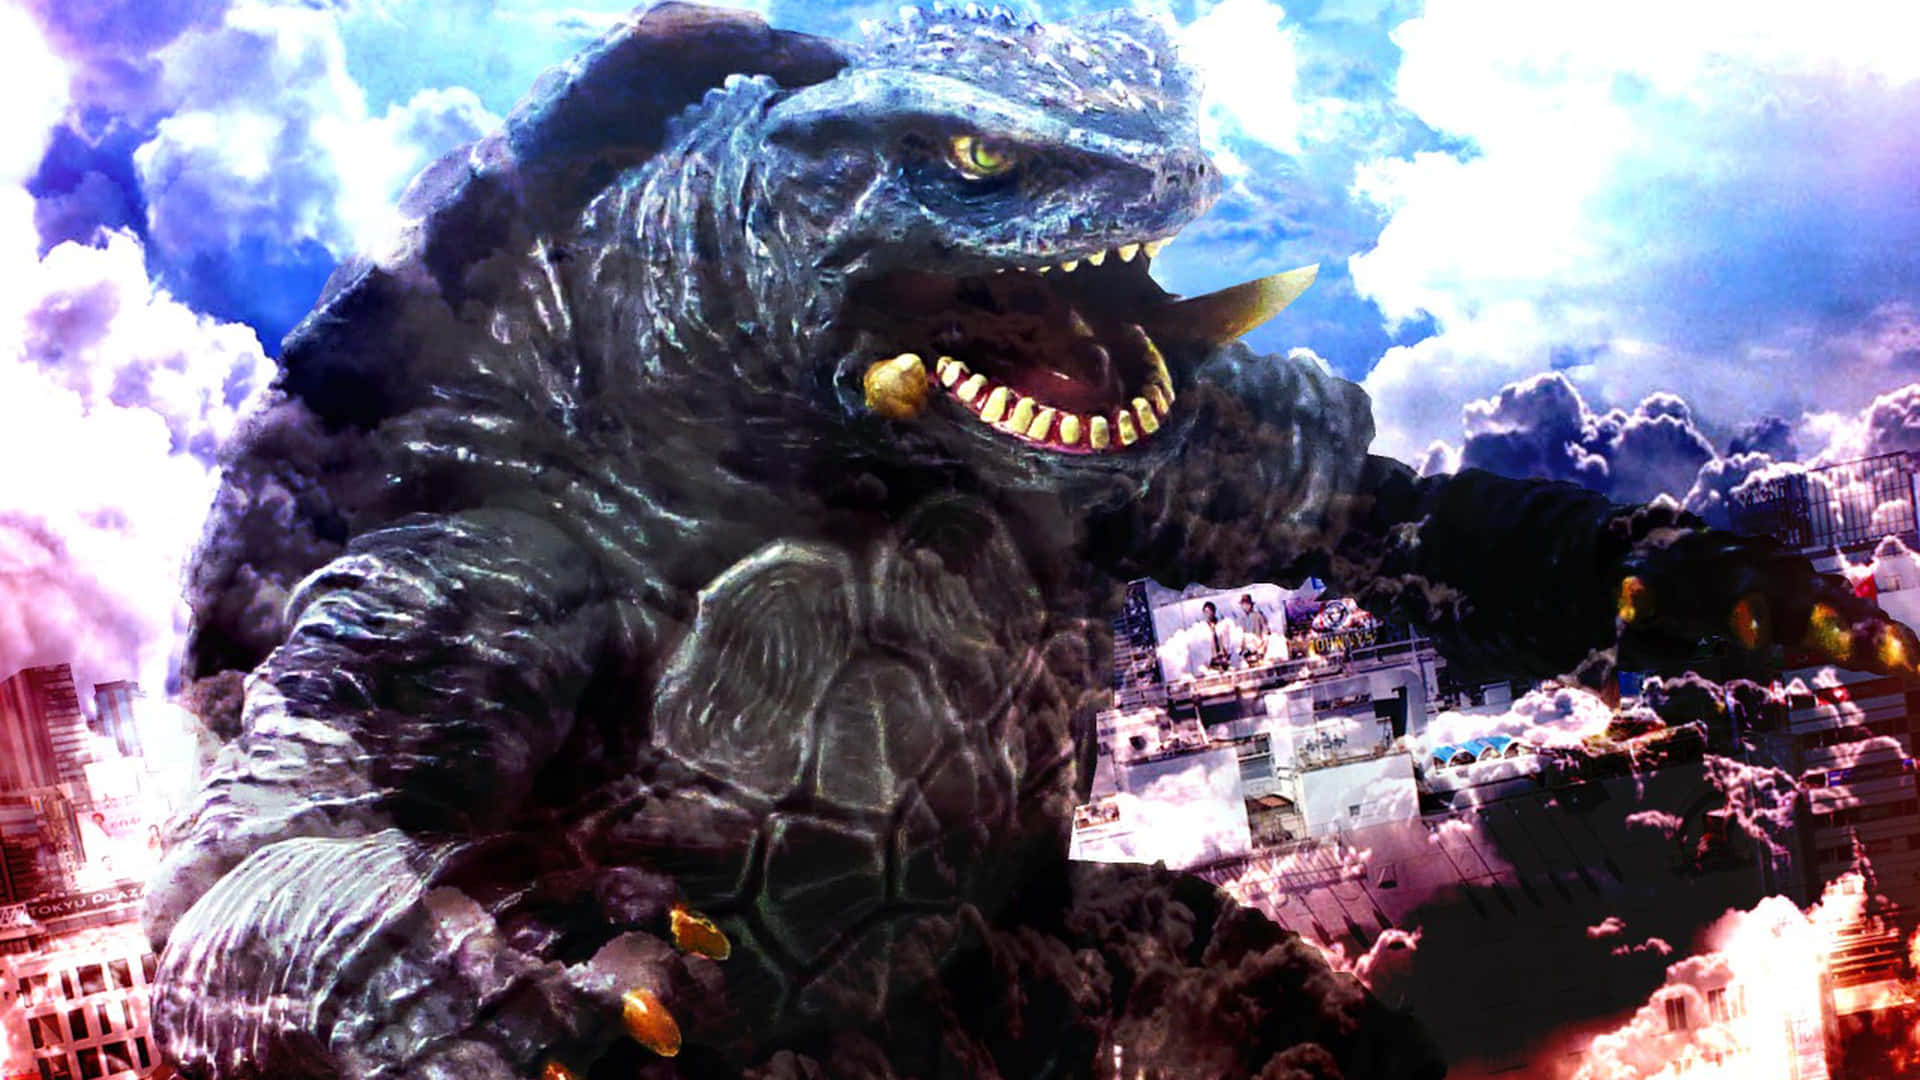 The mighty Gamera unleashes his fury! Wallpaper